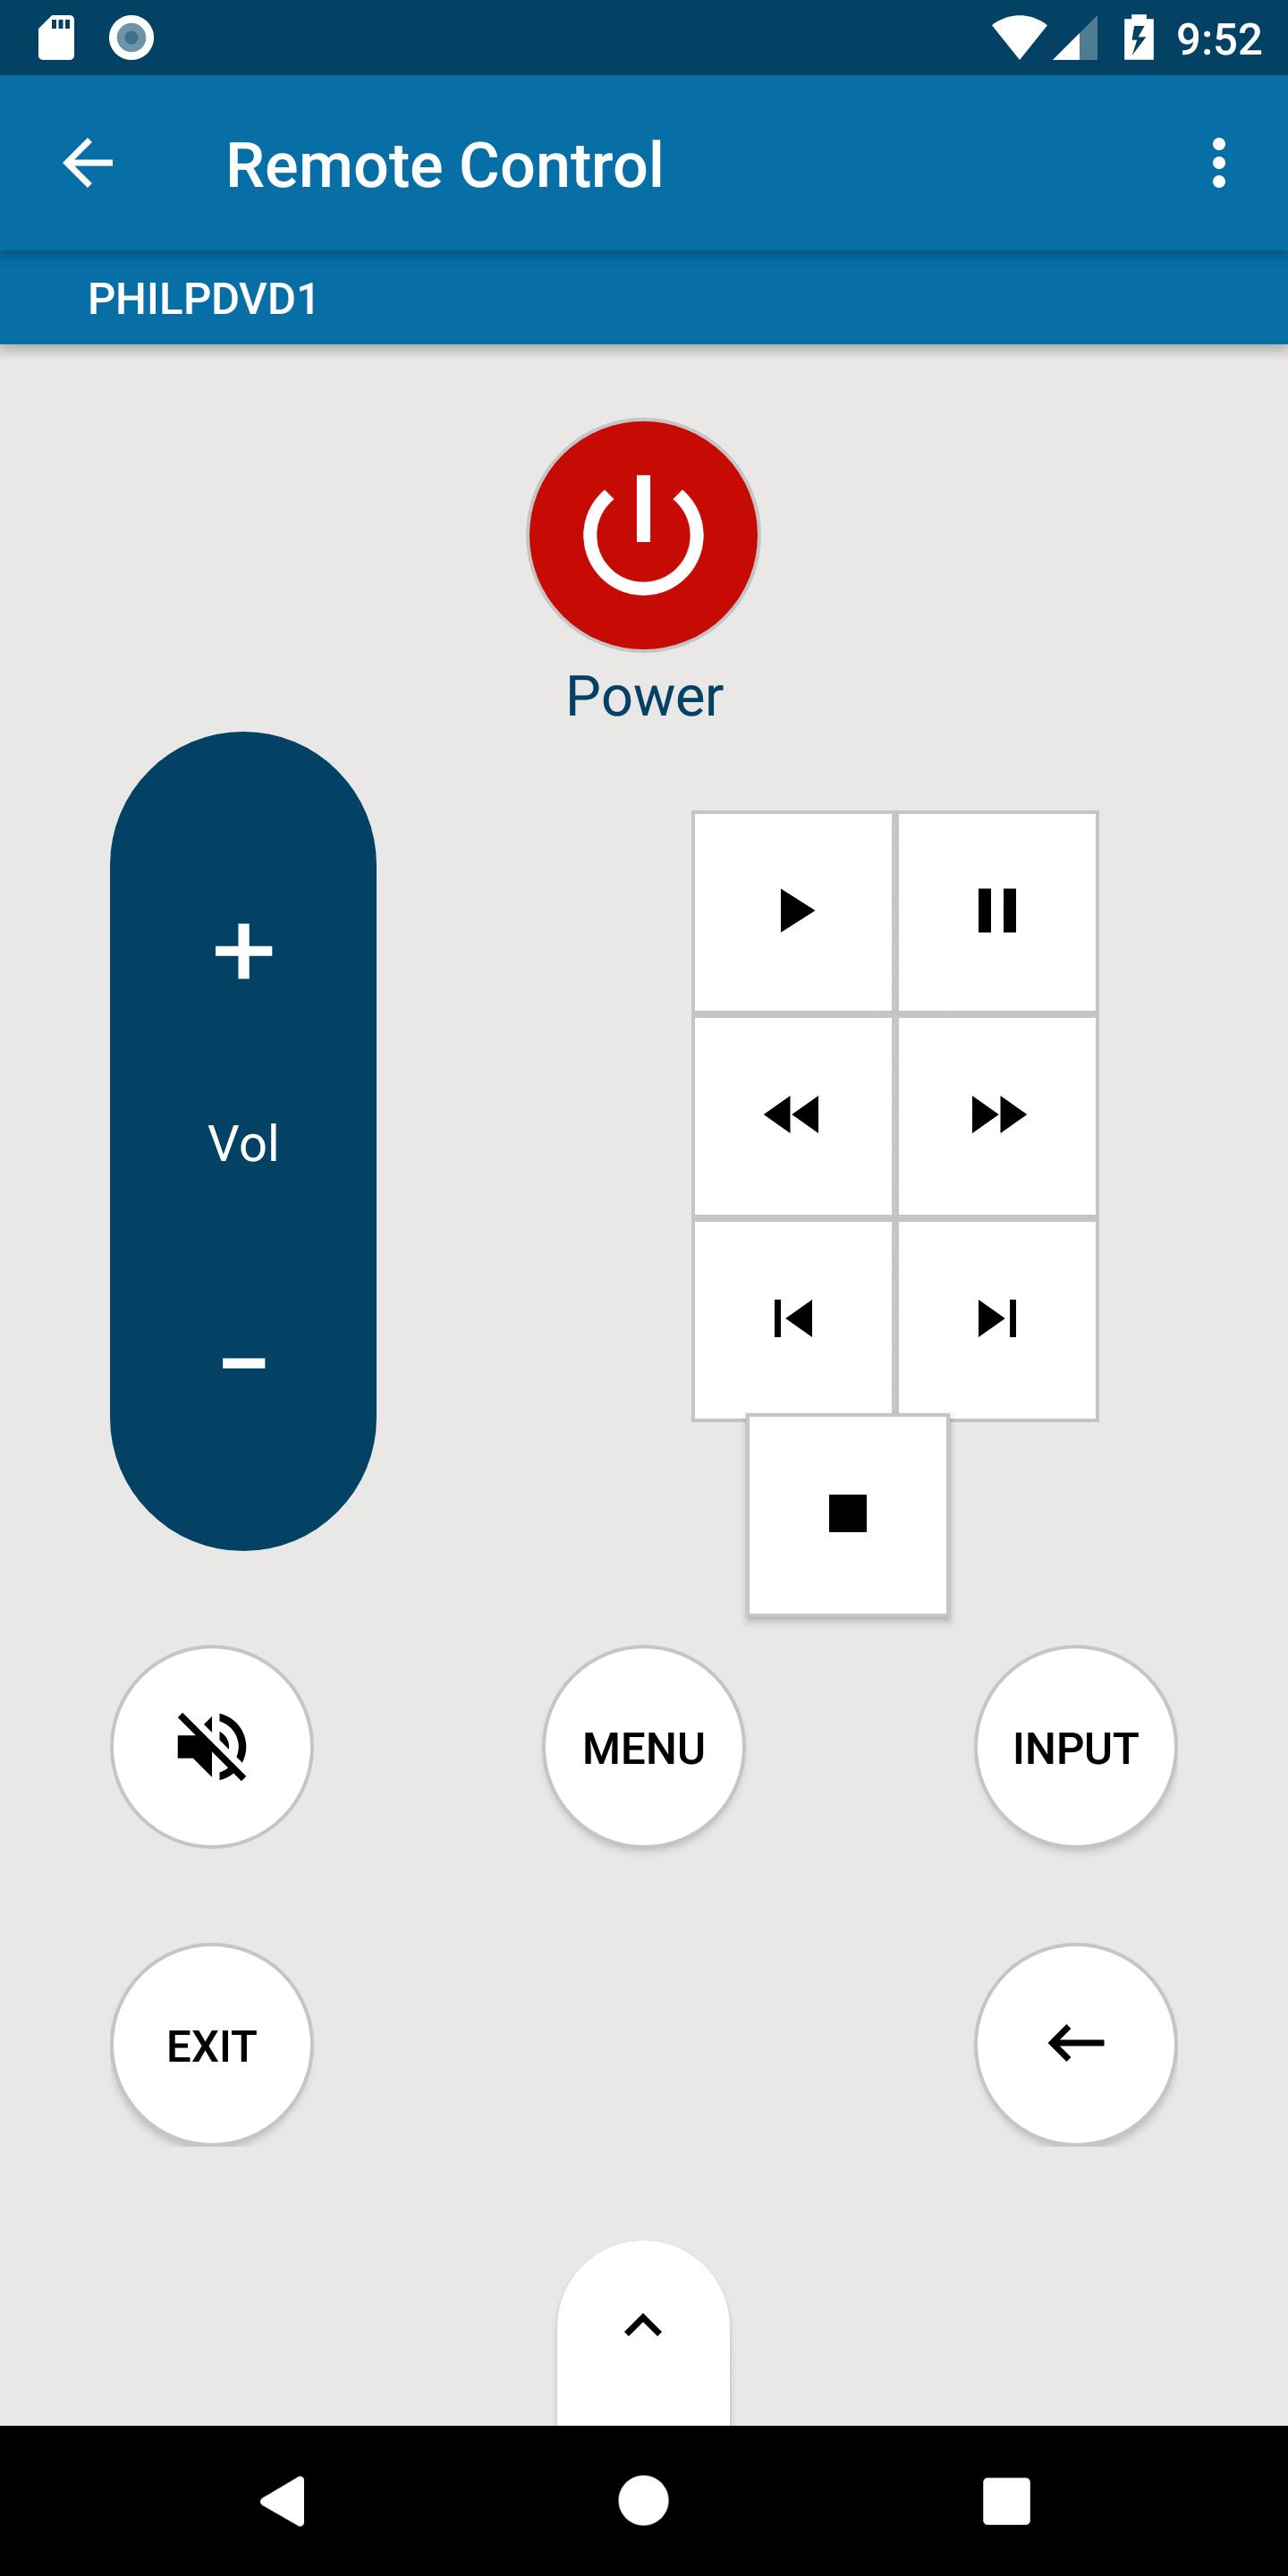 Philips DVD Remote for Android - APK Download